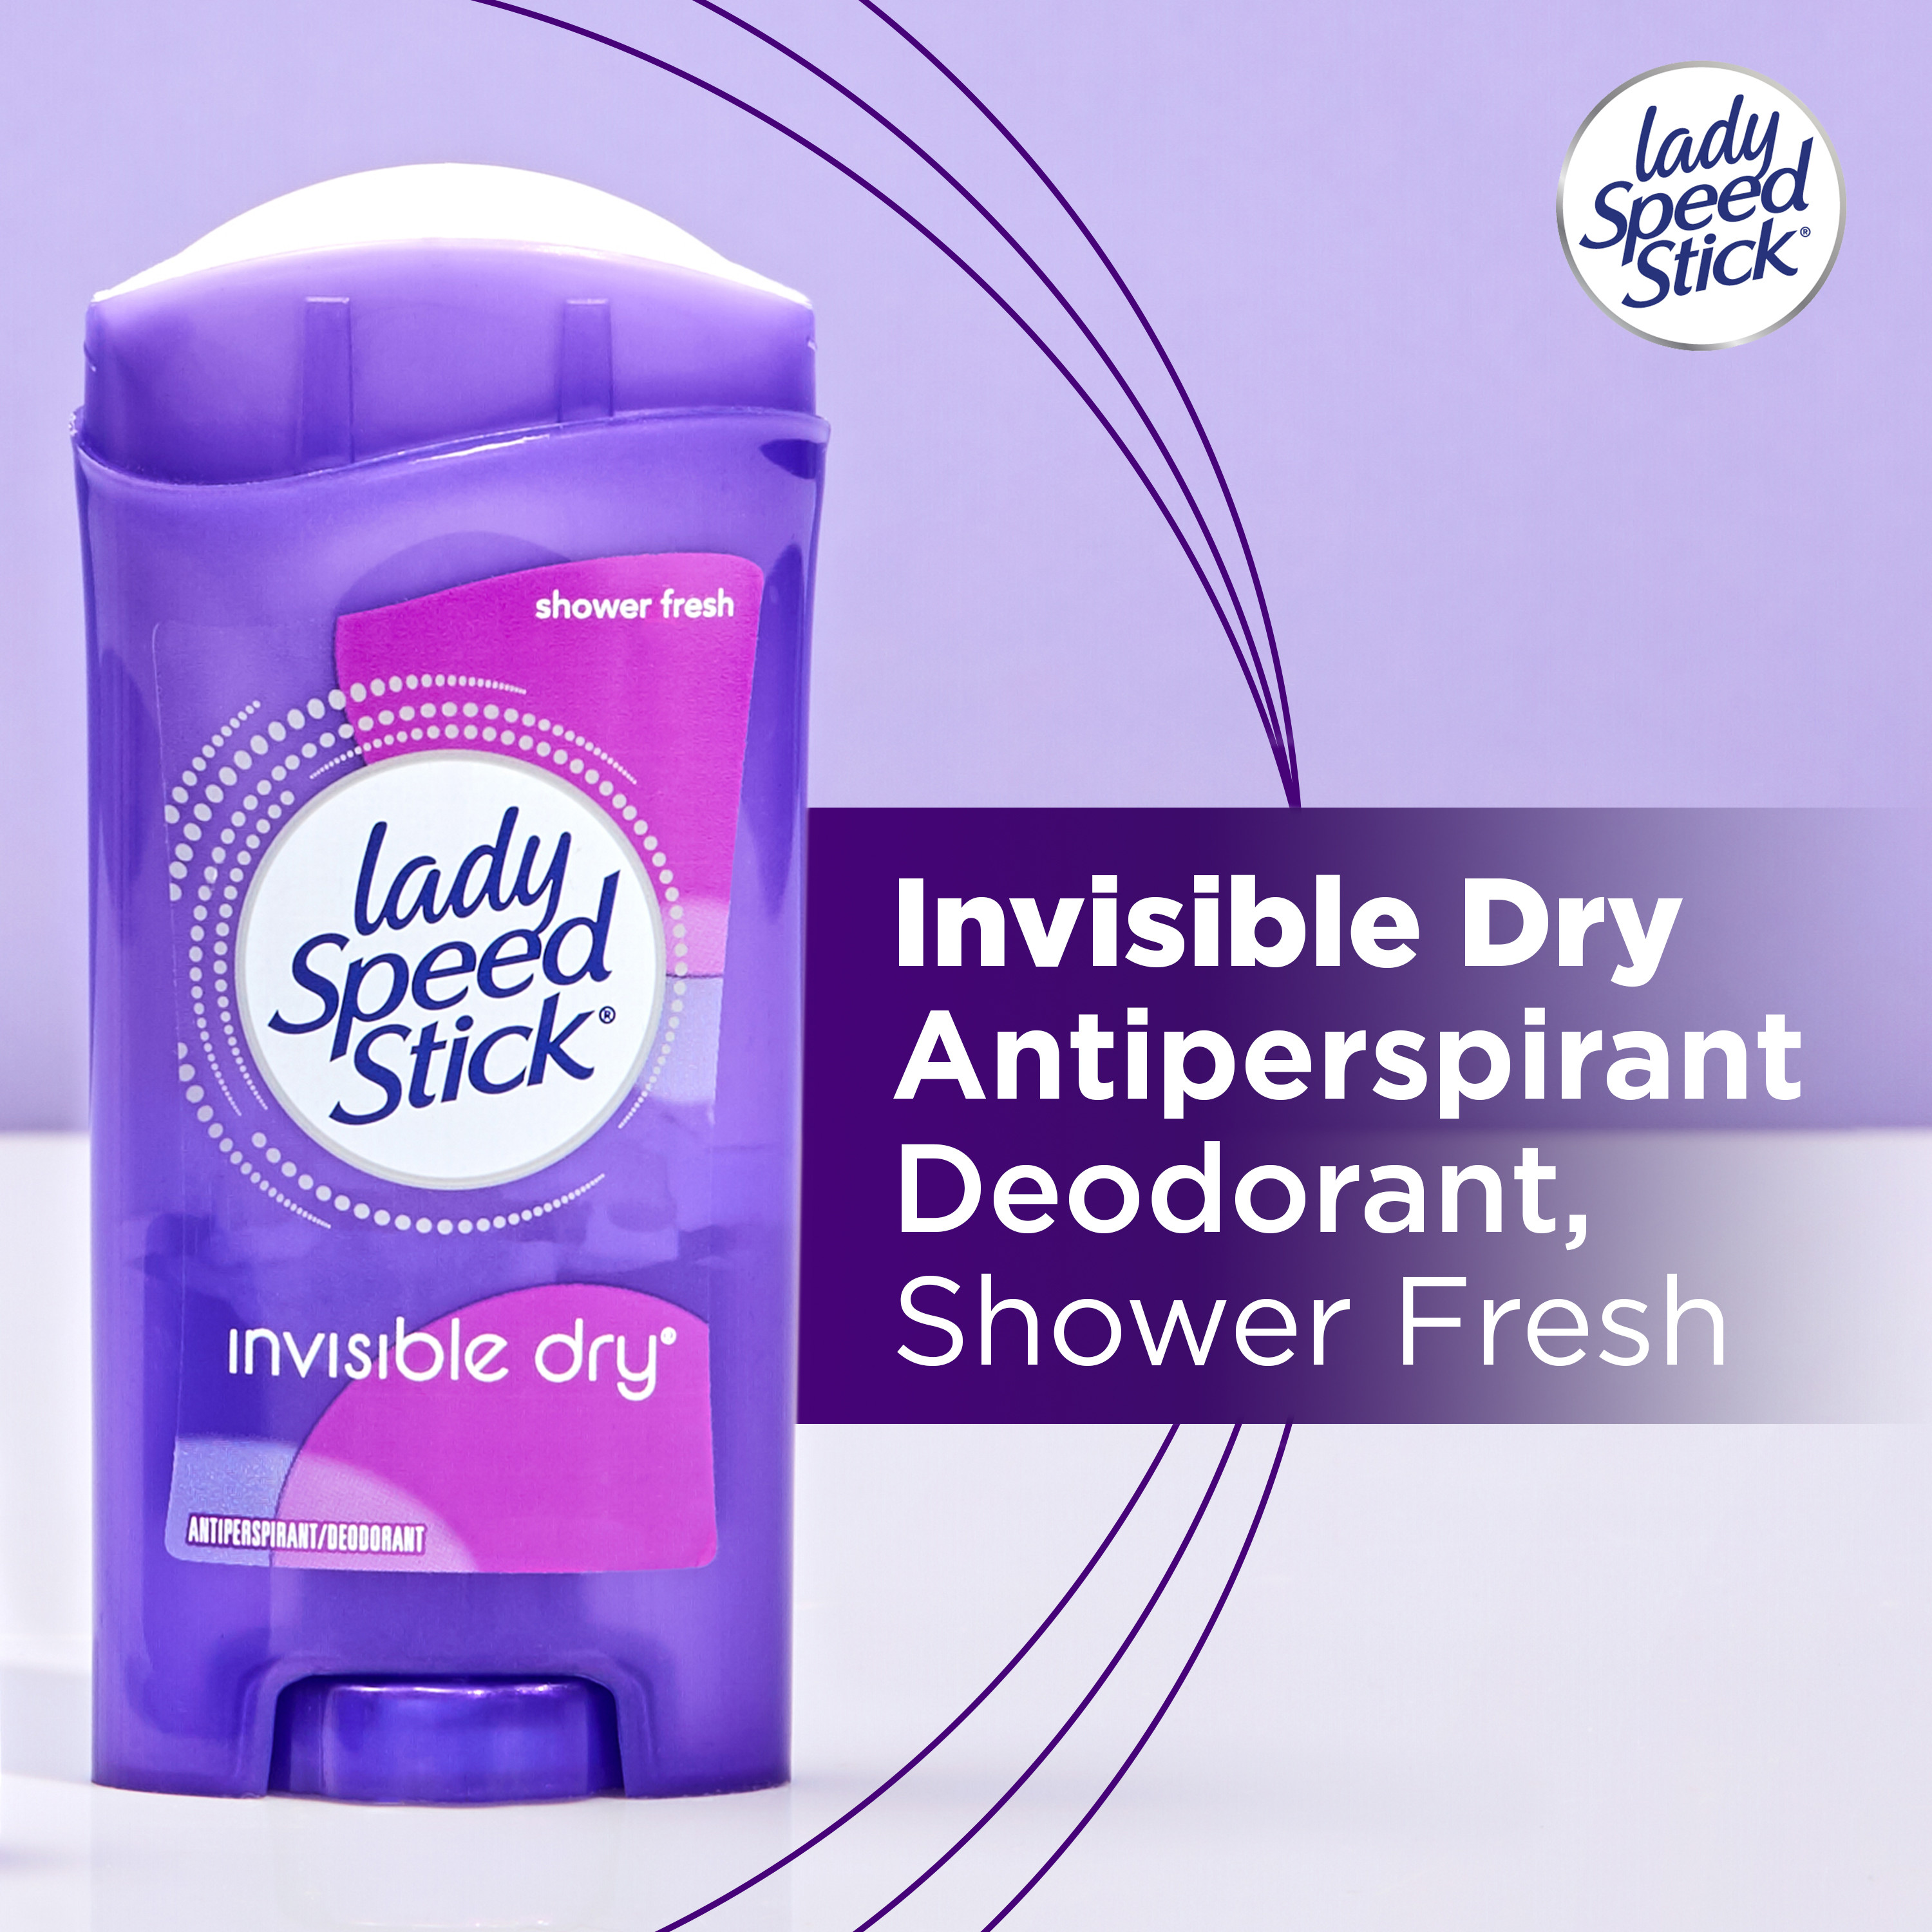 Lady Speed Stick Invisible Dry Antiperspirant Female Deodorant, Shower Fresh, 2 Pack, 2.3 oz - image 5 of 15